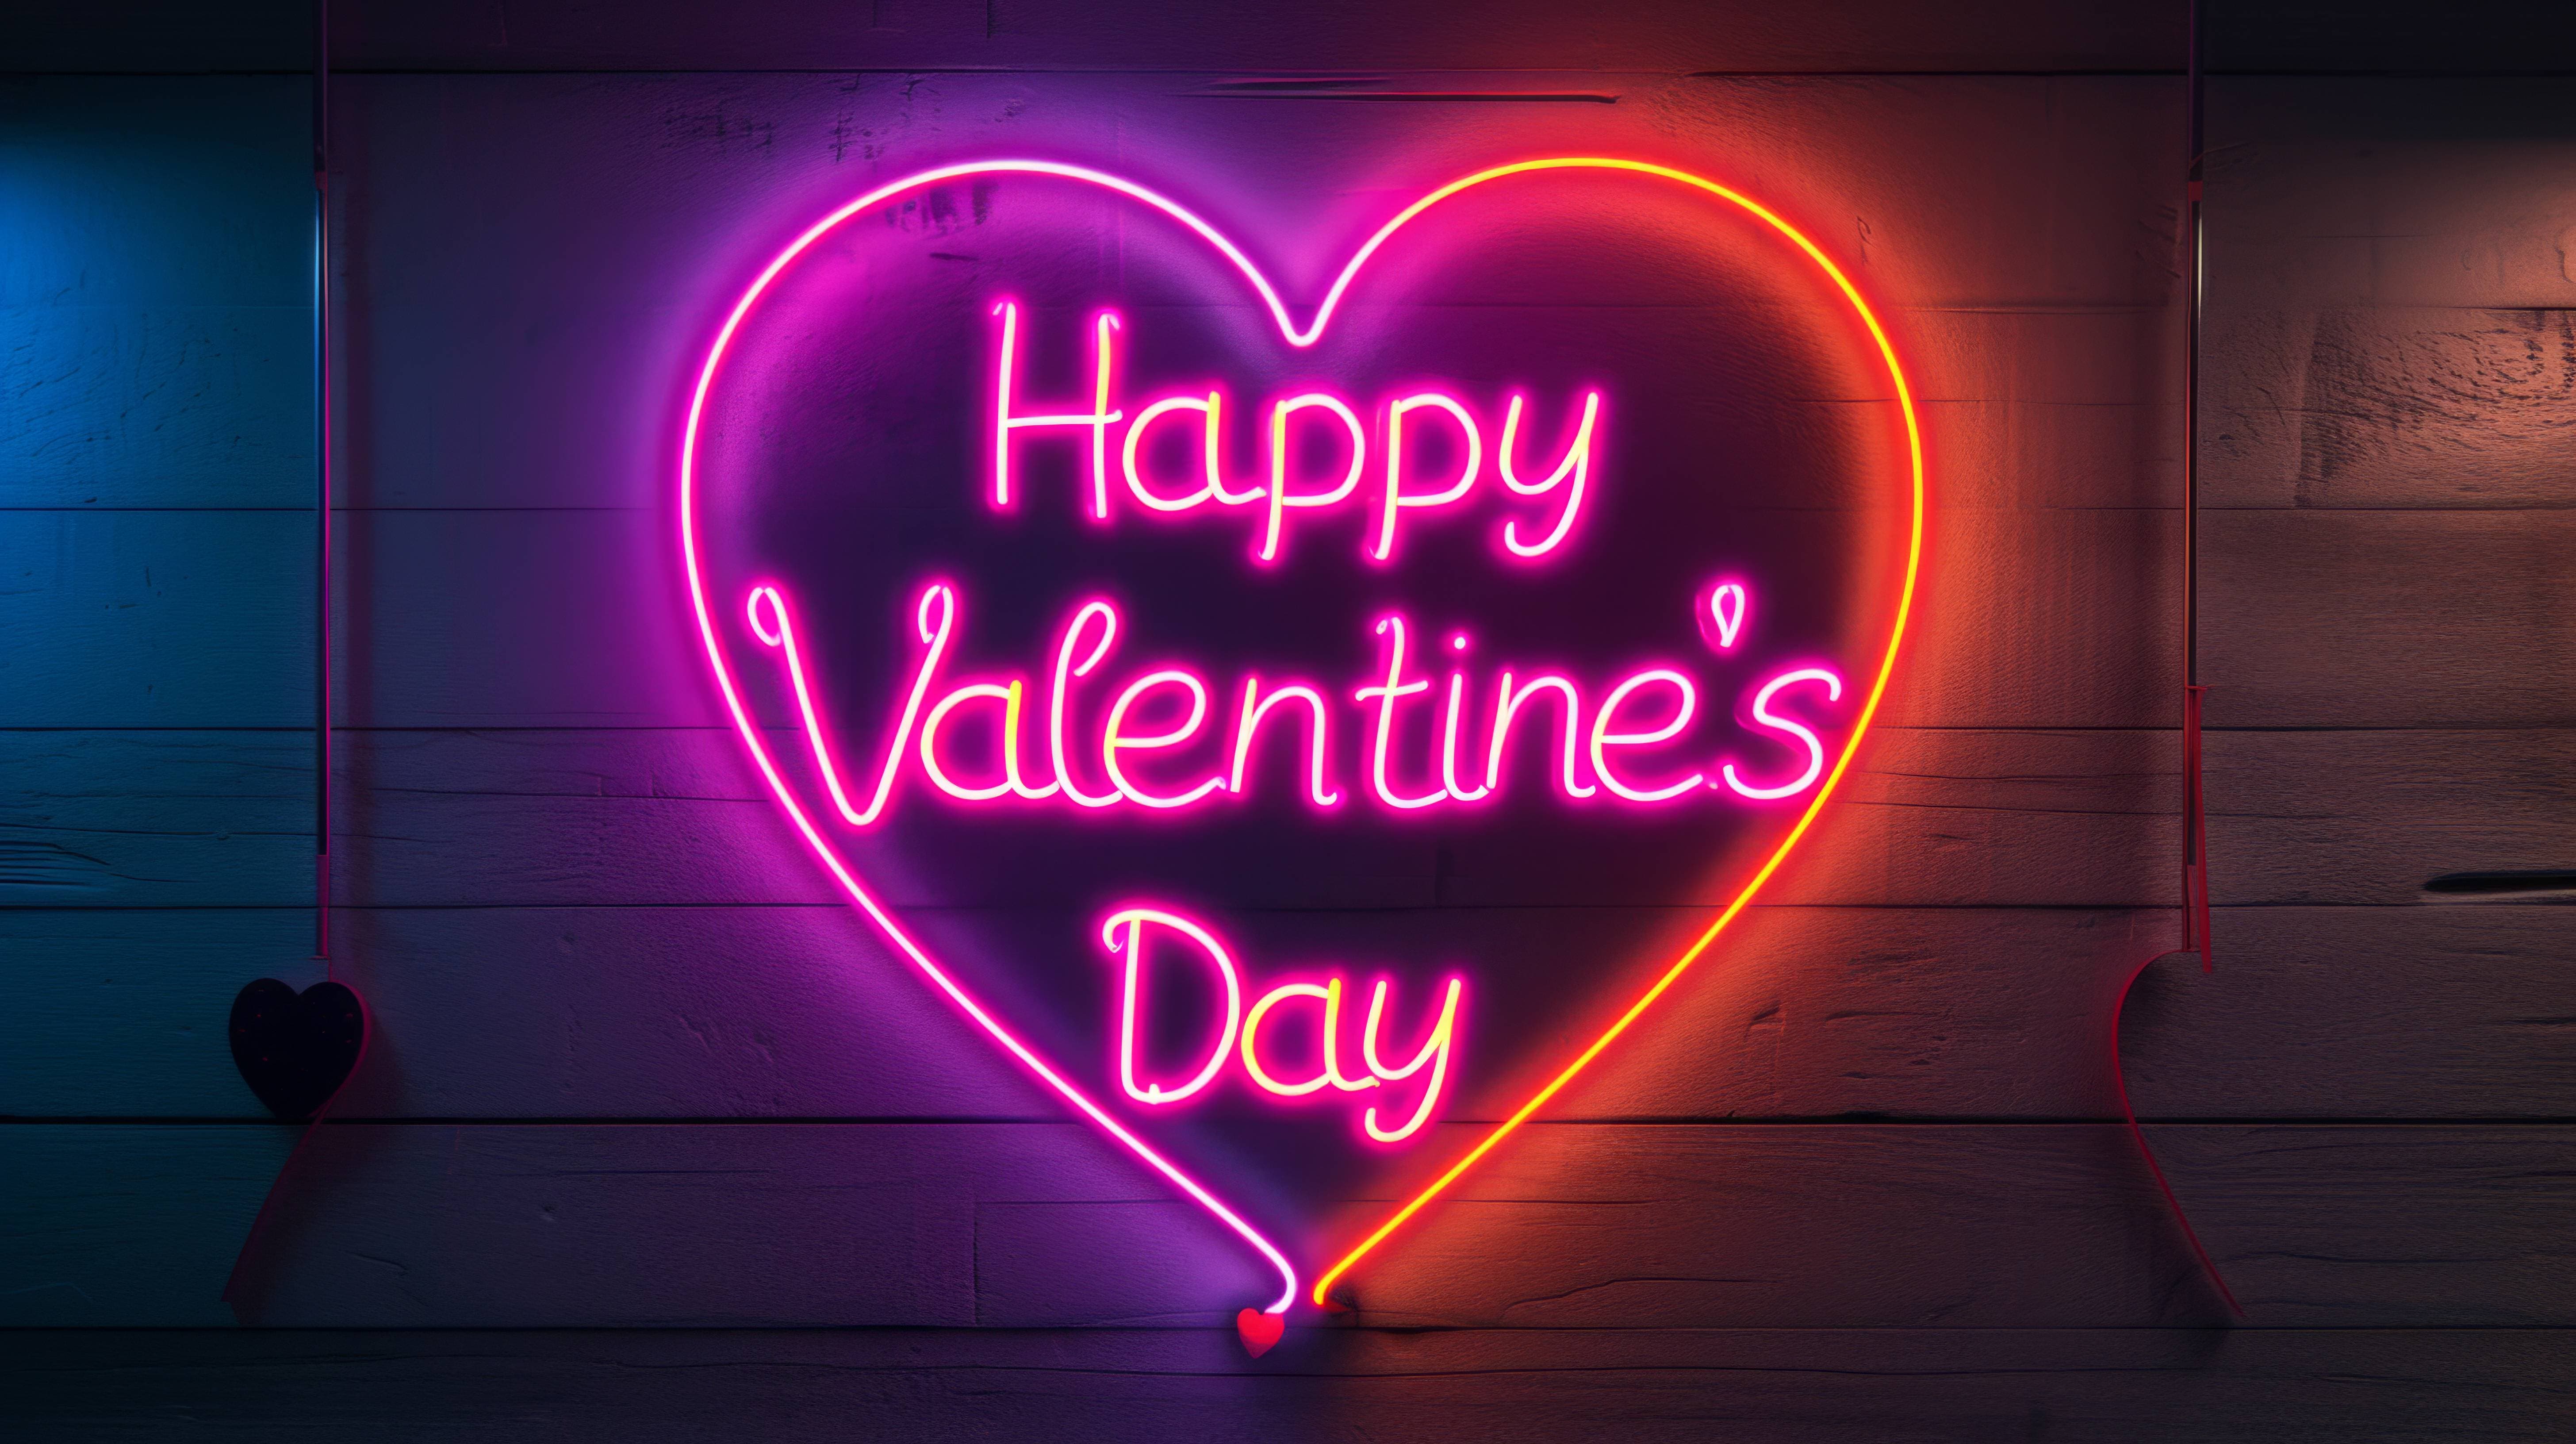 Valentines Day neon wallpaper Resolution 5824x3264 | Best Download this awesome wallpaper - Cool Wallpaper HD - CoolWallpaper-HD.com